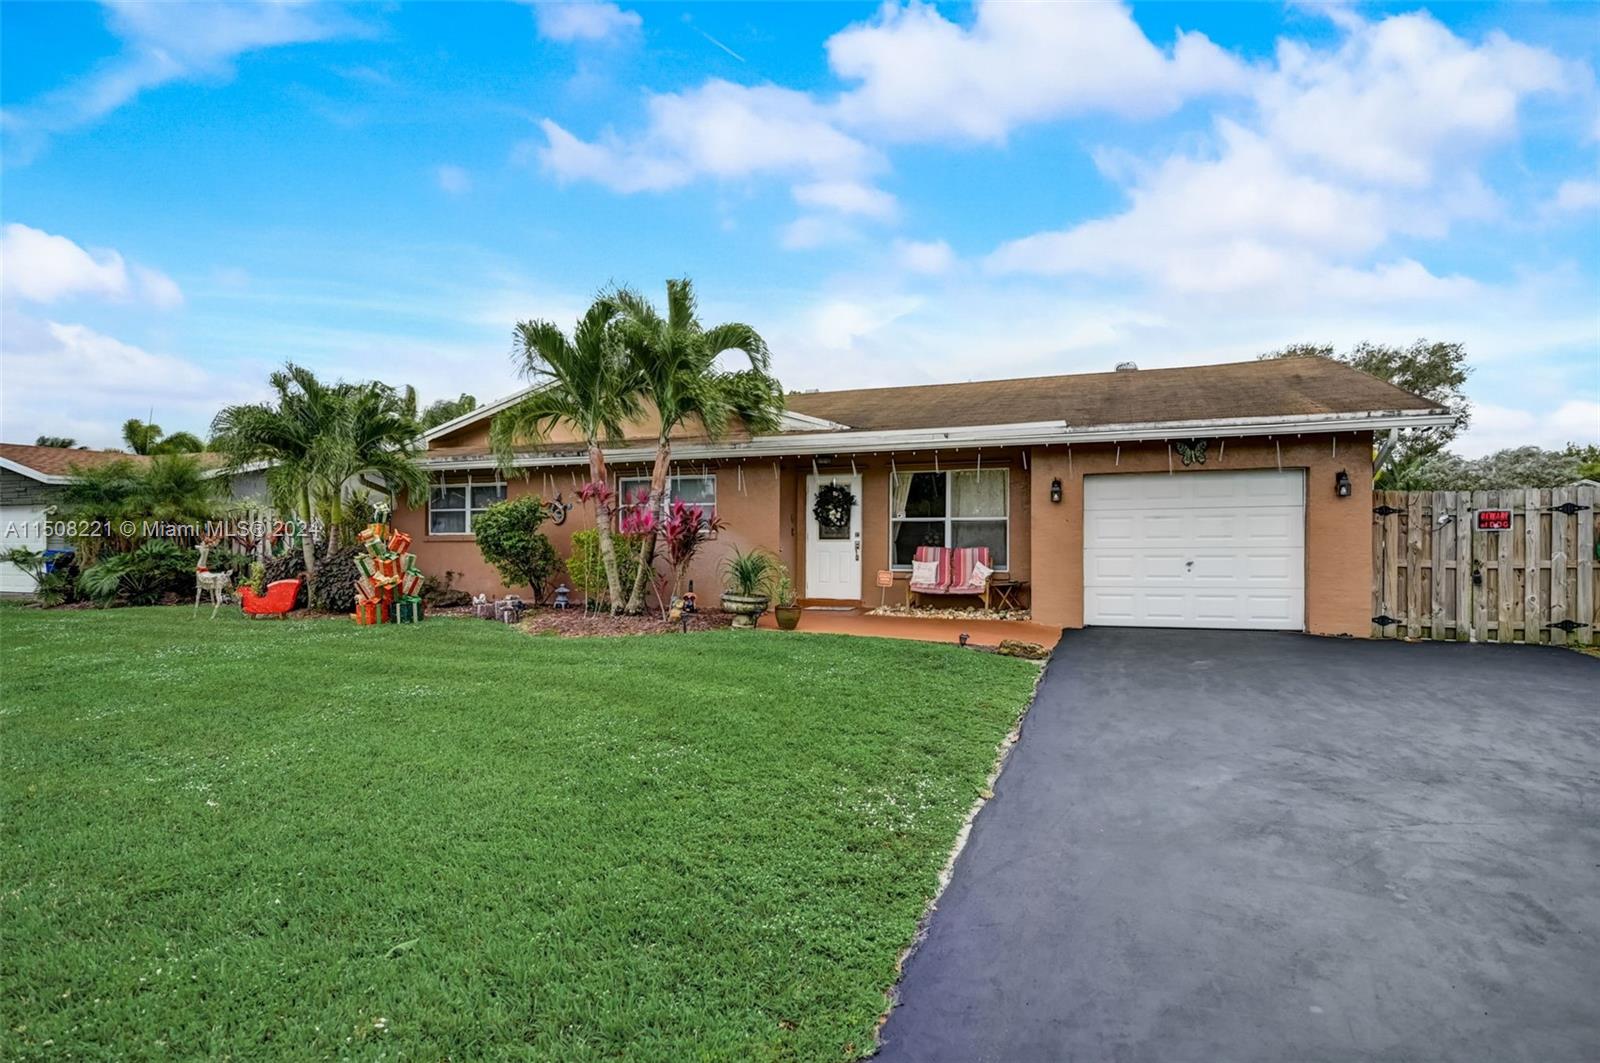 3330 Nw 65th St St, Fort Lauderdale, Broward County, Florida - 4 Bedrooms  
2 Bathrooms - 